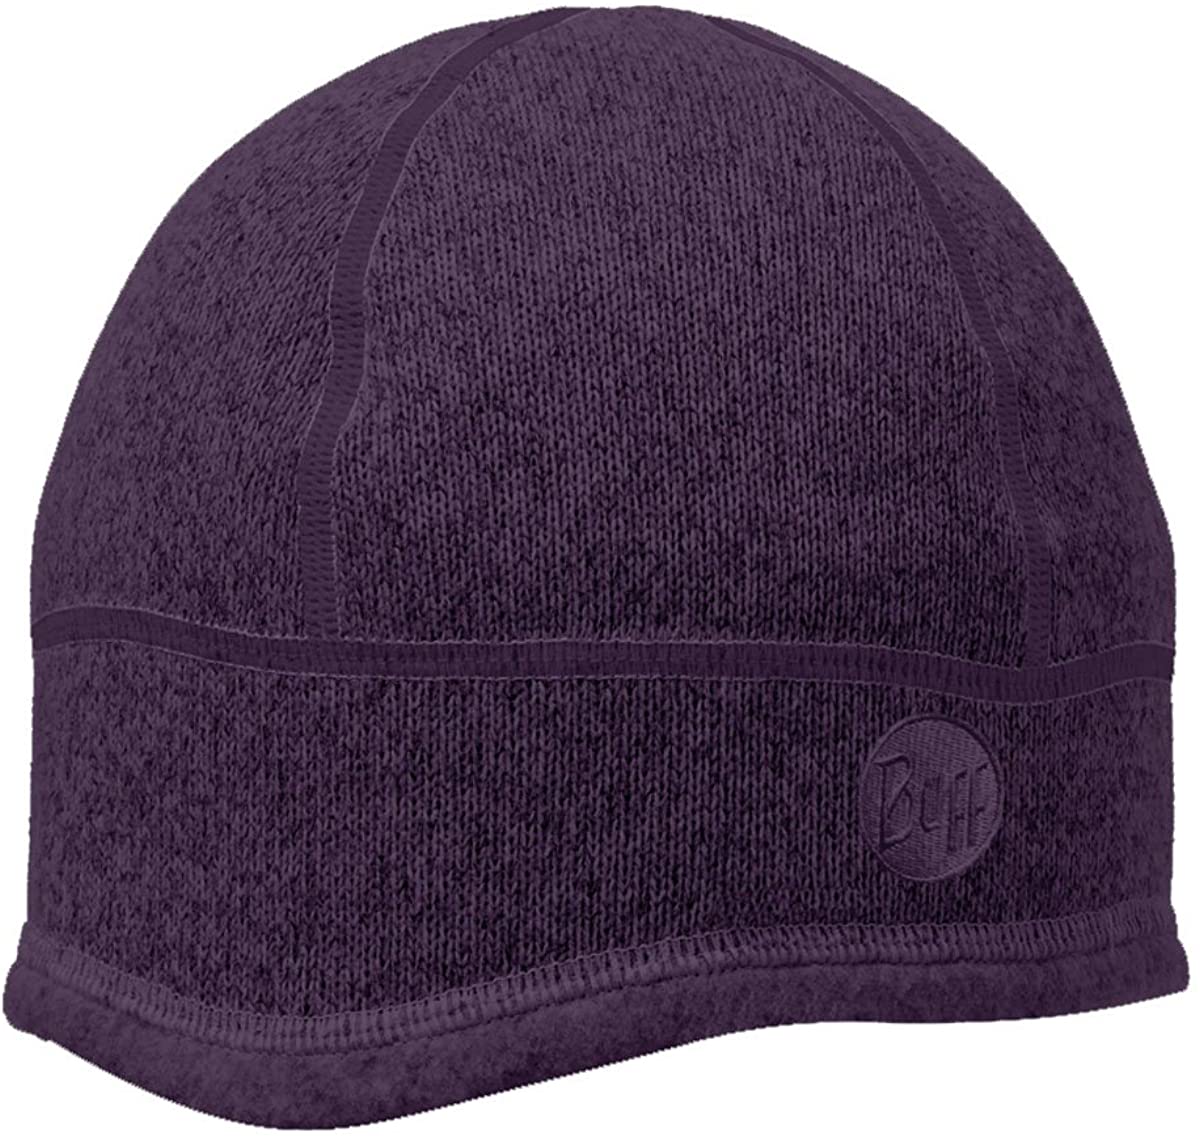 110956  Thermal Hat Buff Solid Plum